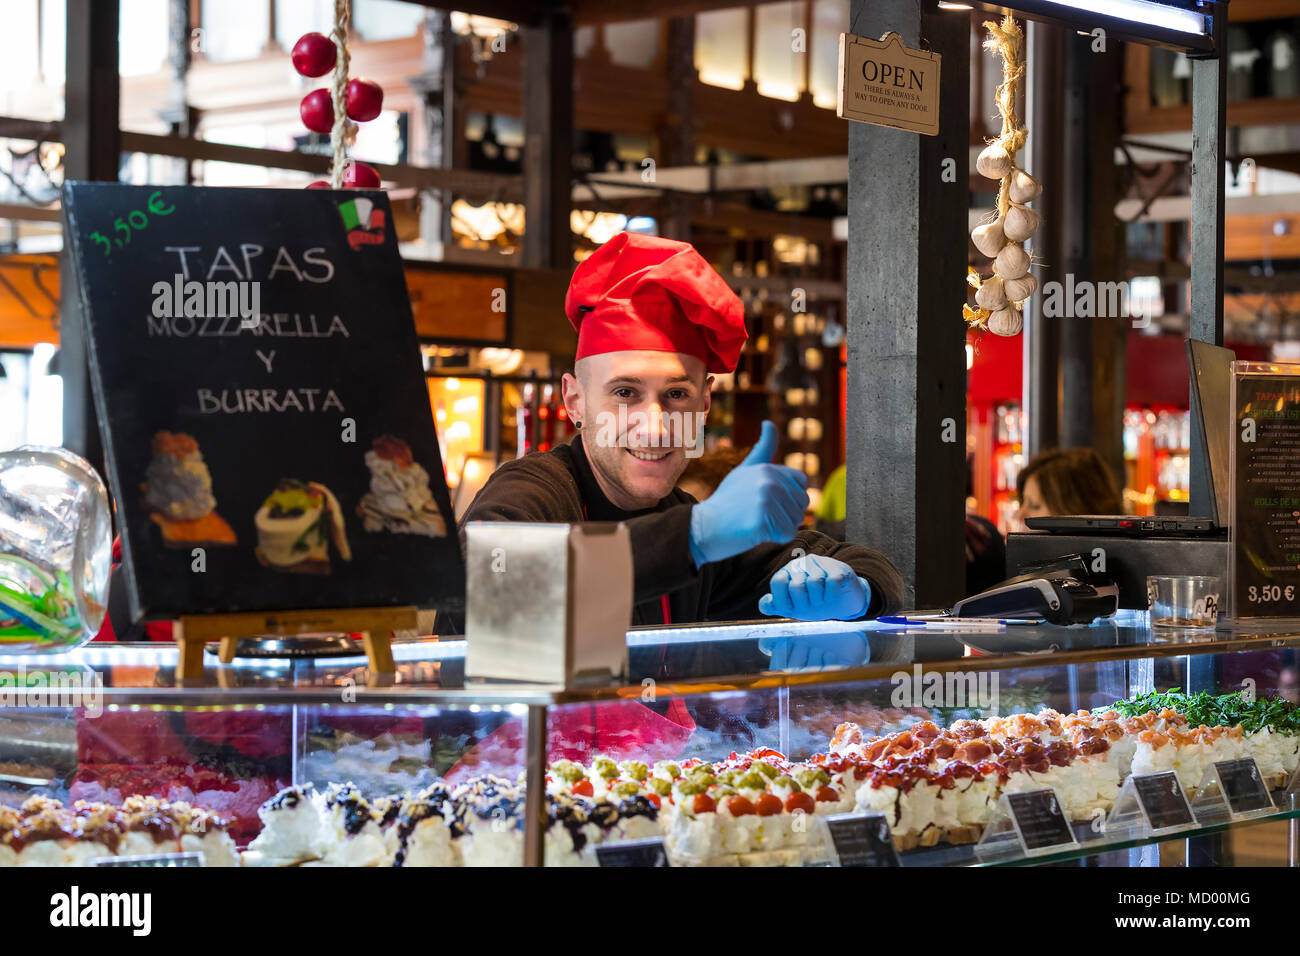 MADRID, SPAIN - 28 MARCH, 2018: Sightseeing market of San Miguel customer service. Stock Photo